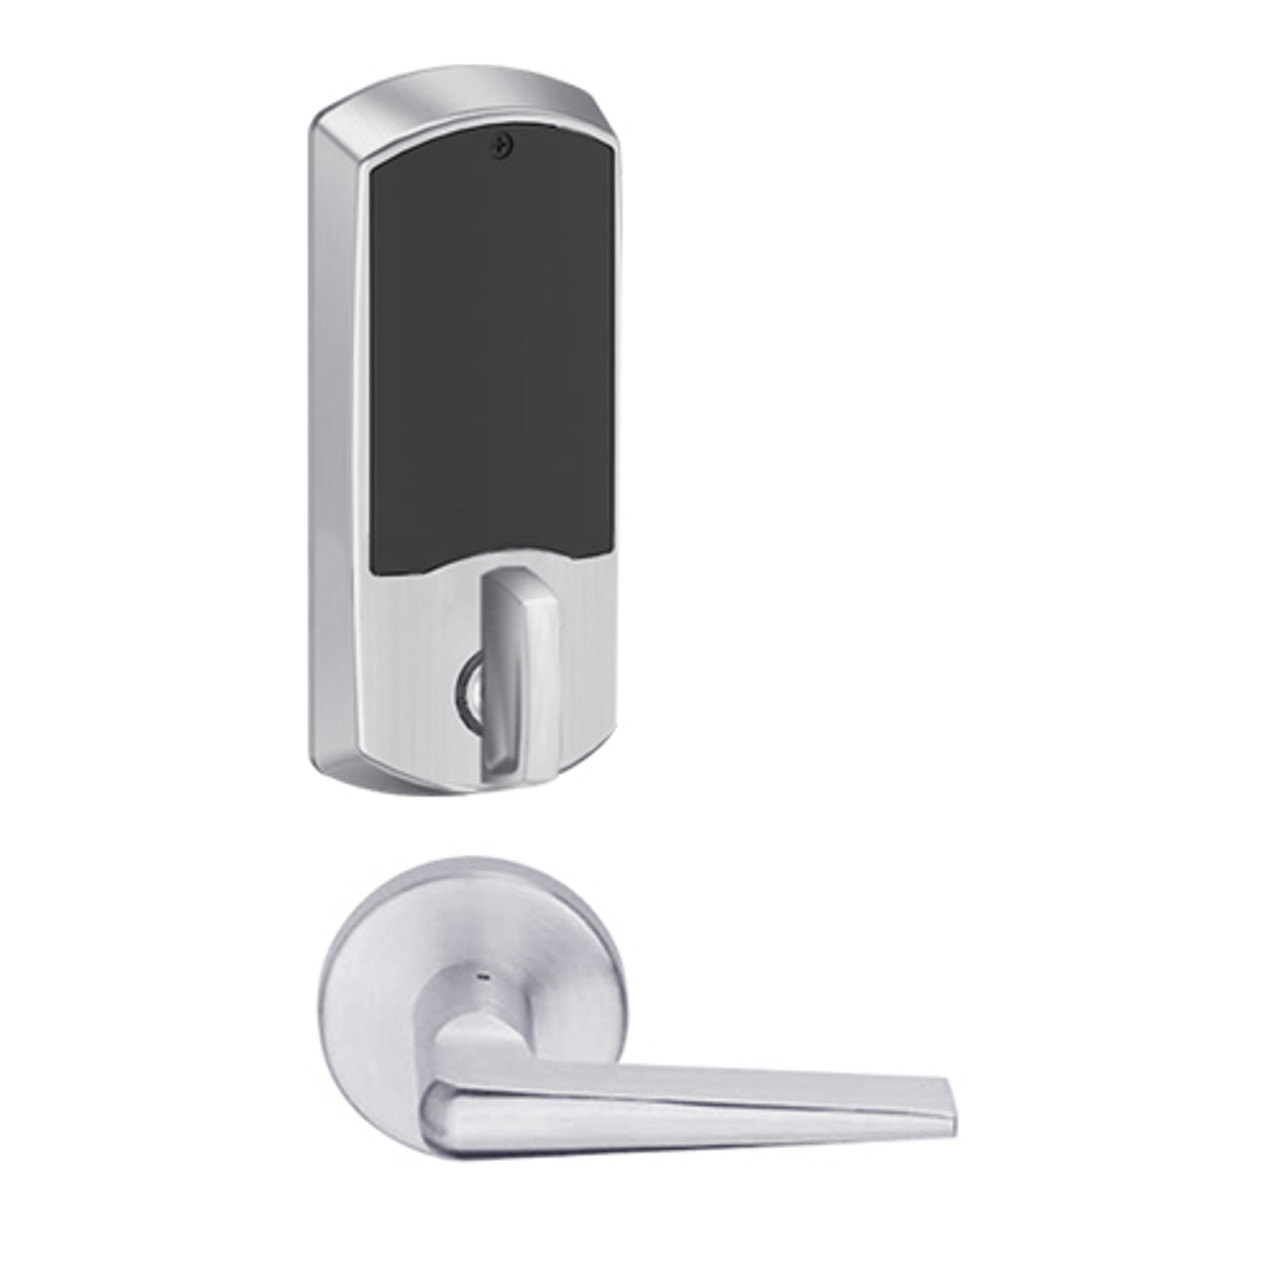 LEMD-GRW-J-05-626-00C Schlage Privacy/Apartment Wireless Greenwich Mortise Deadbolt Lock with LED and 05 Lever Prepped for FSIC in Satin Chrome